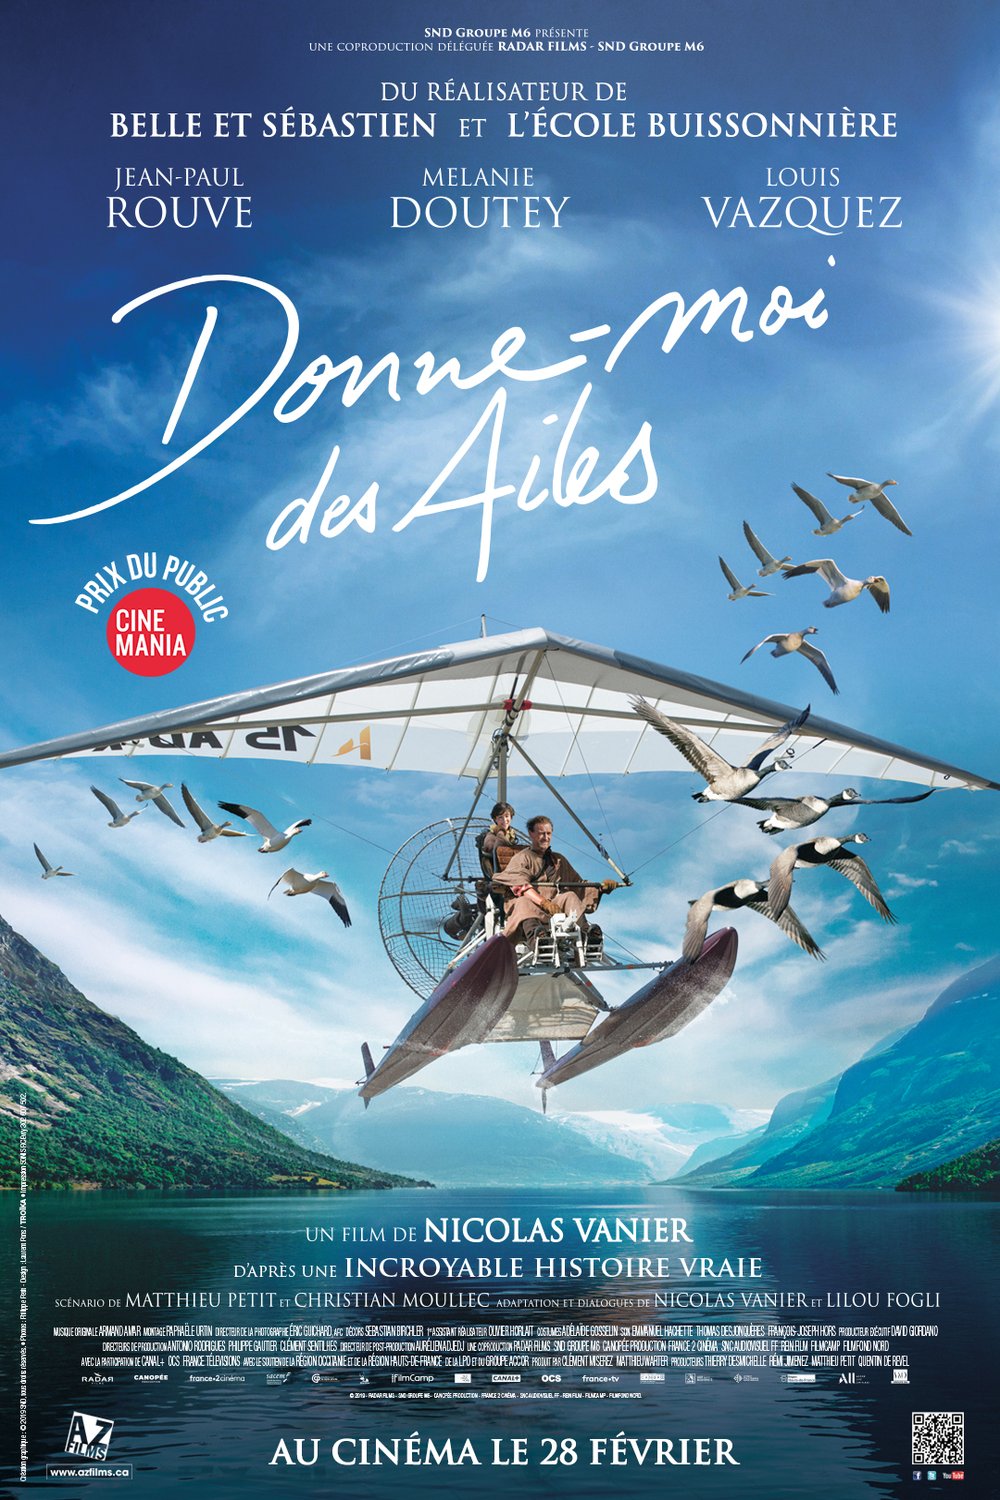 Poster of the movie Donne-moi des ailes